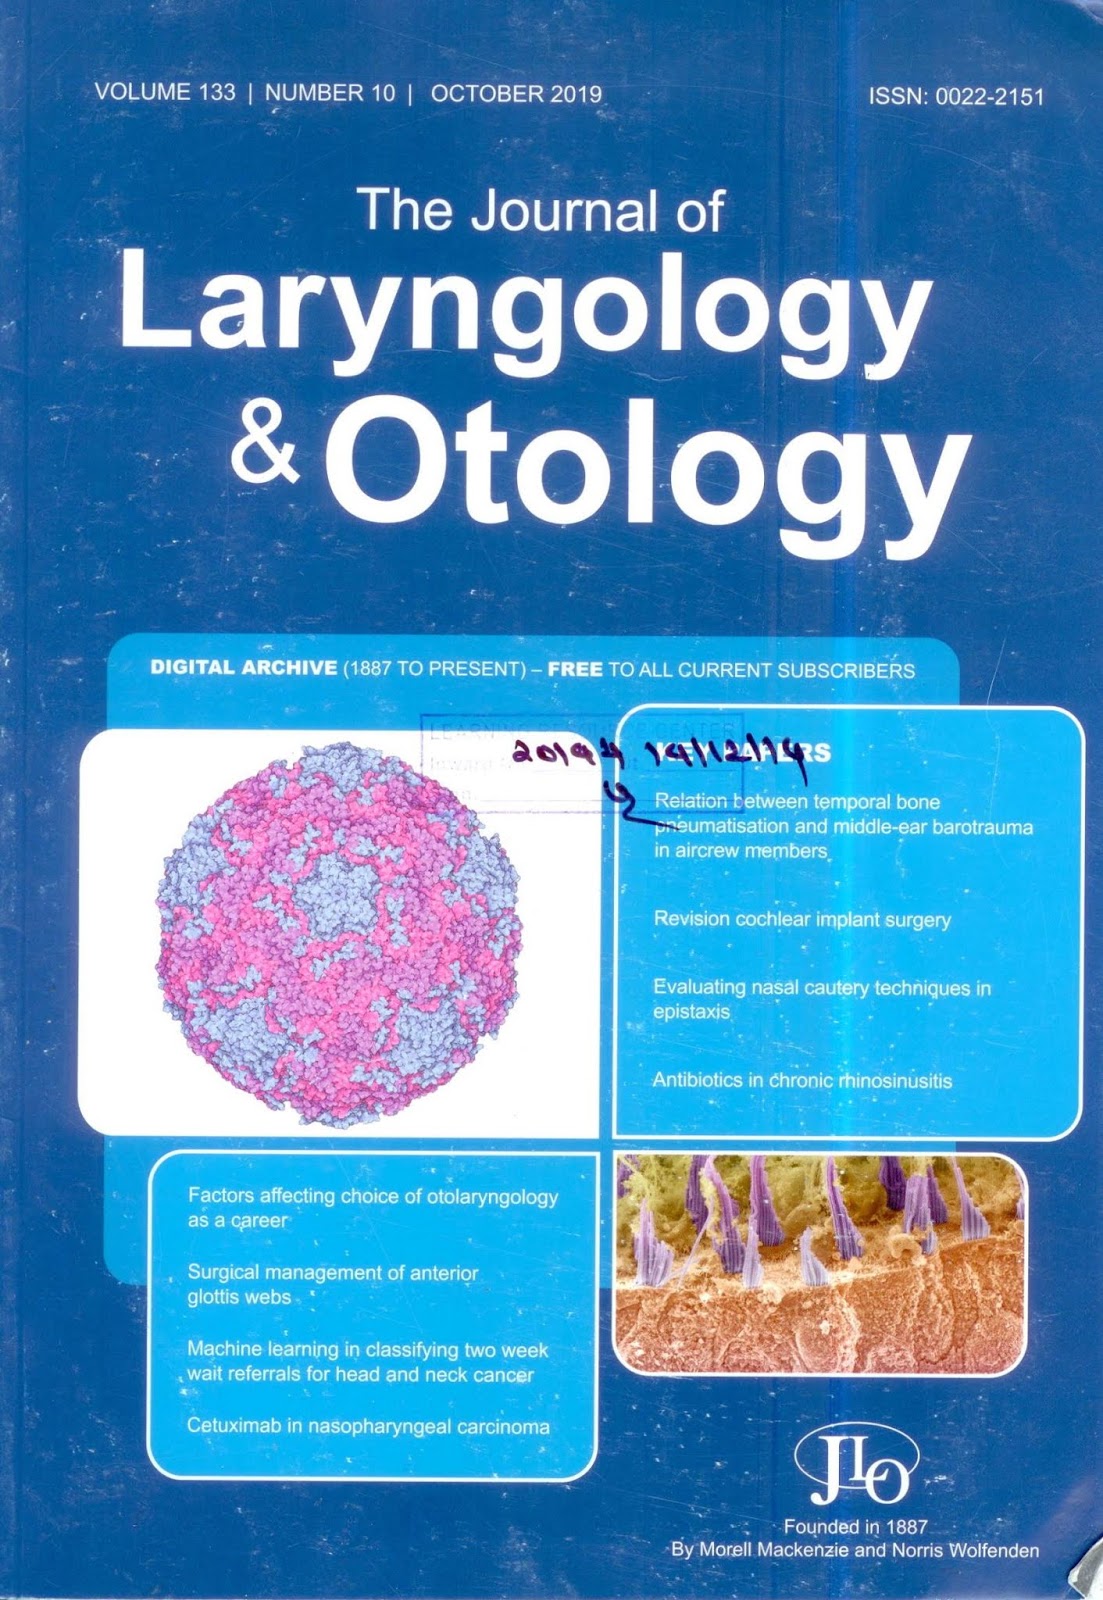 https://www.cambridge.org/core/journals/journal-of-laryngology-and-otology/issue/0B5BCB1EB2CB610A65F87A0974EB2971